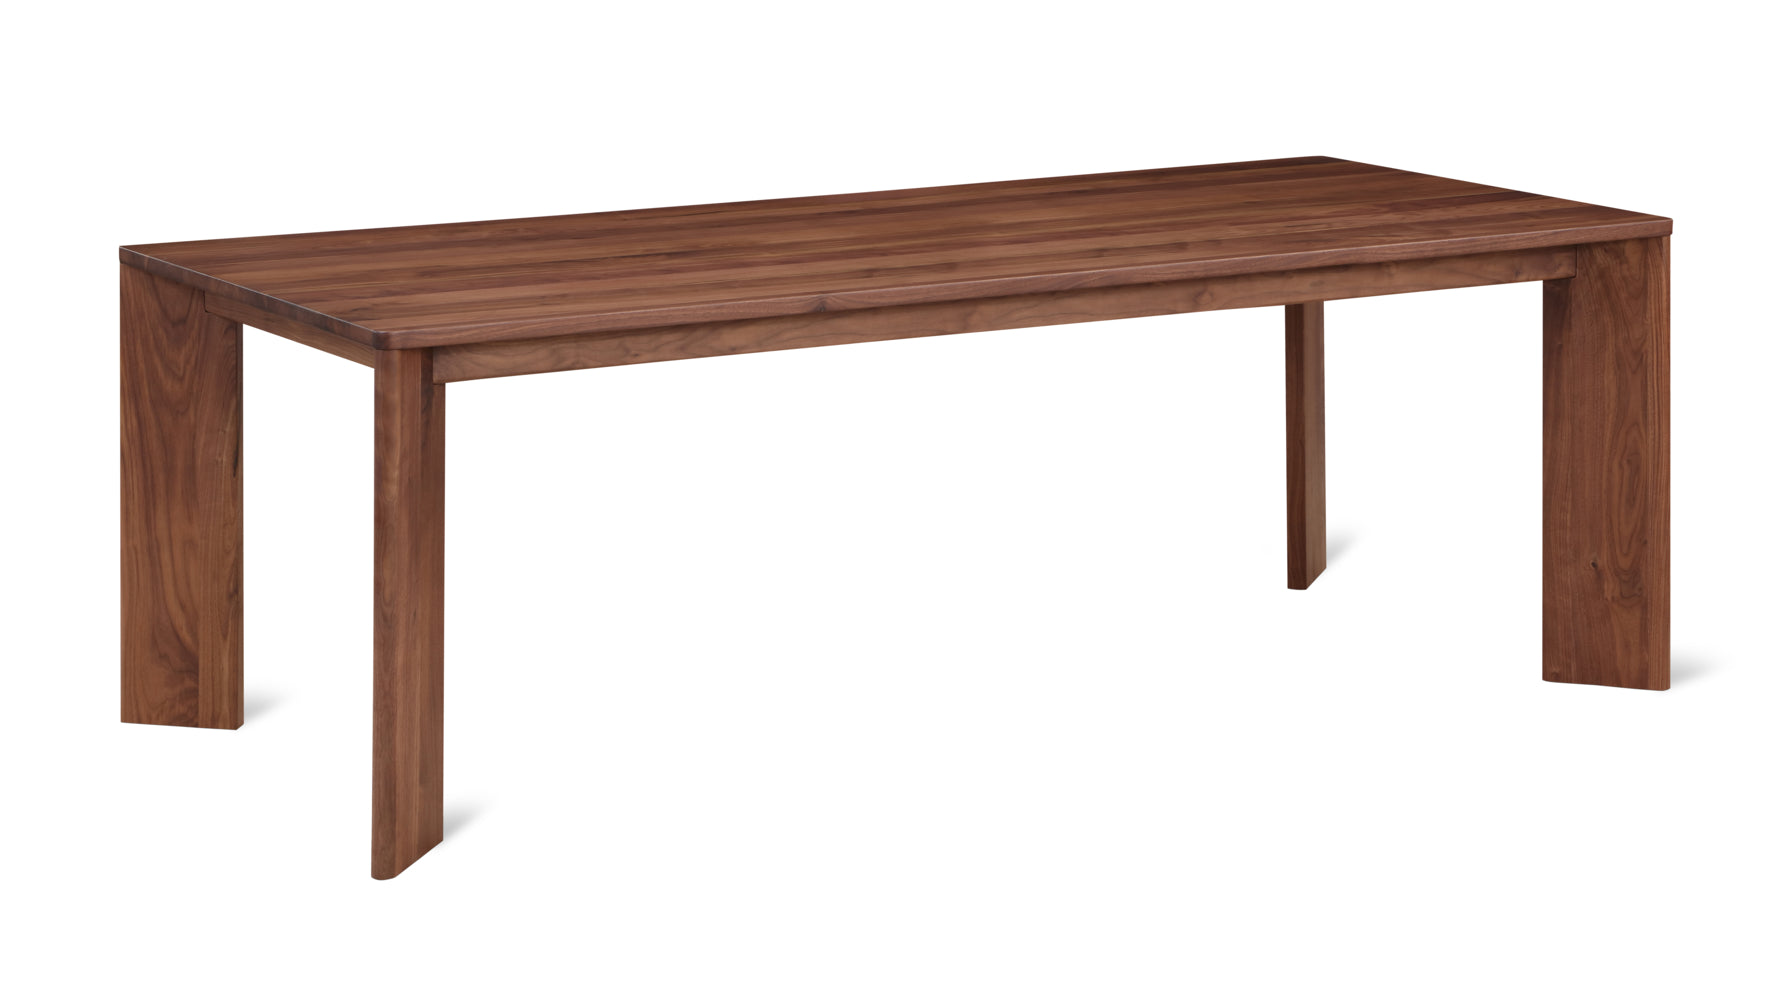 Frame Dining Table, Seats 6-8 People, American Walnut - Image 1